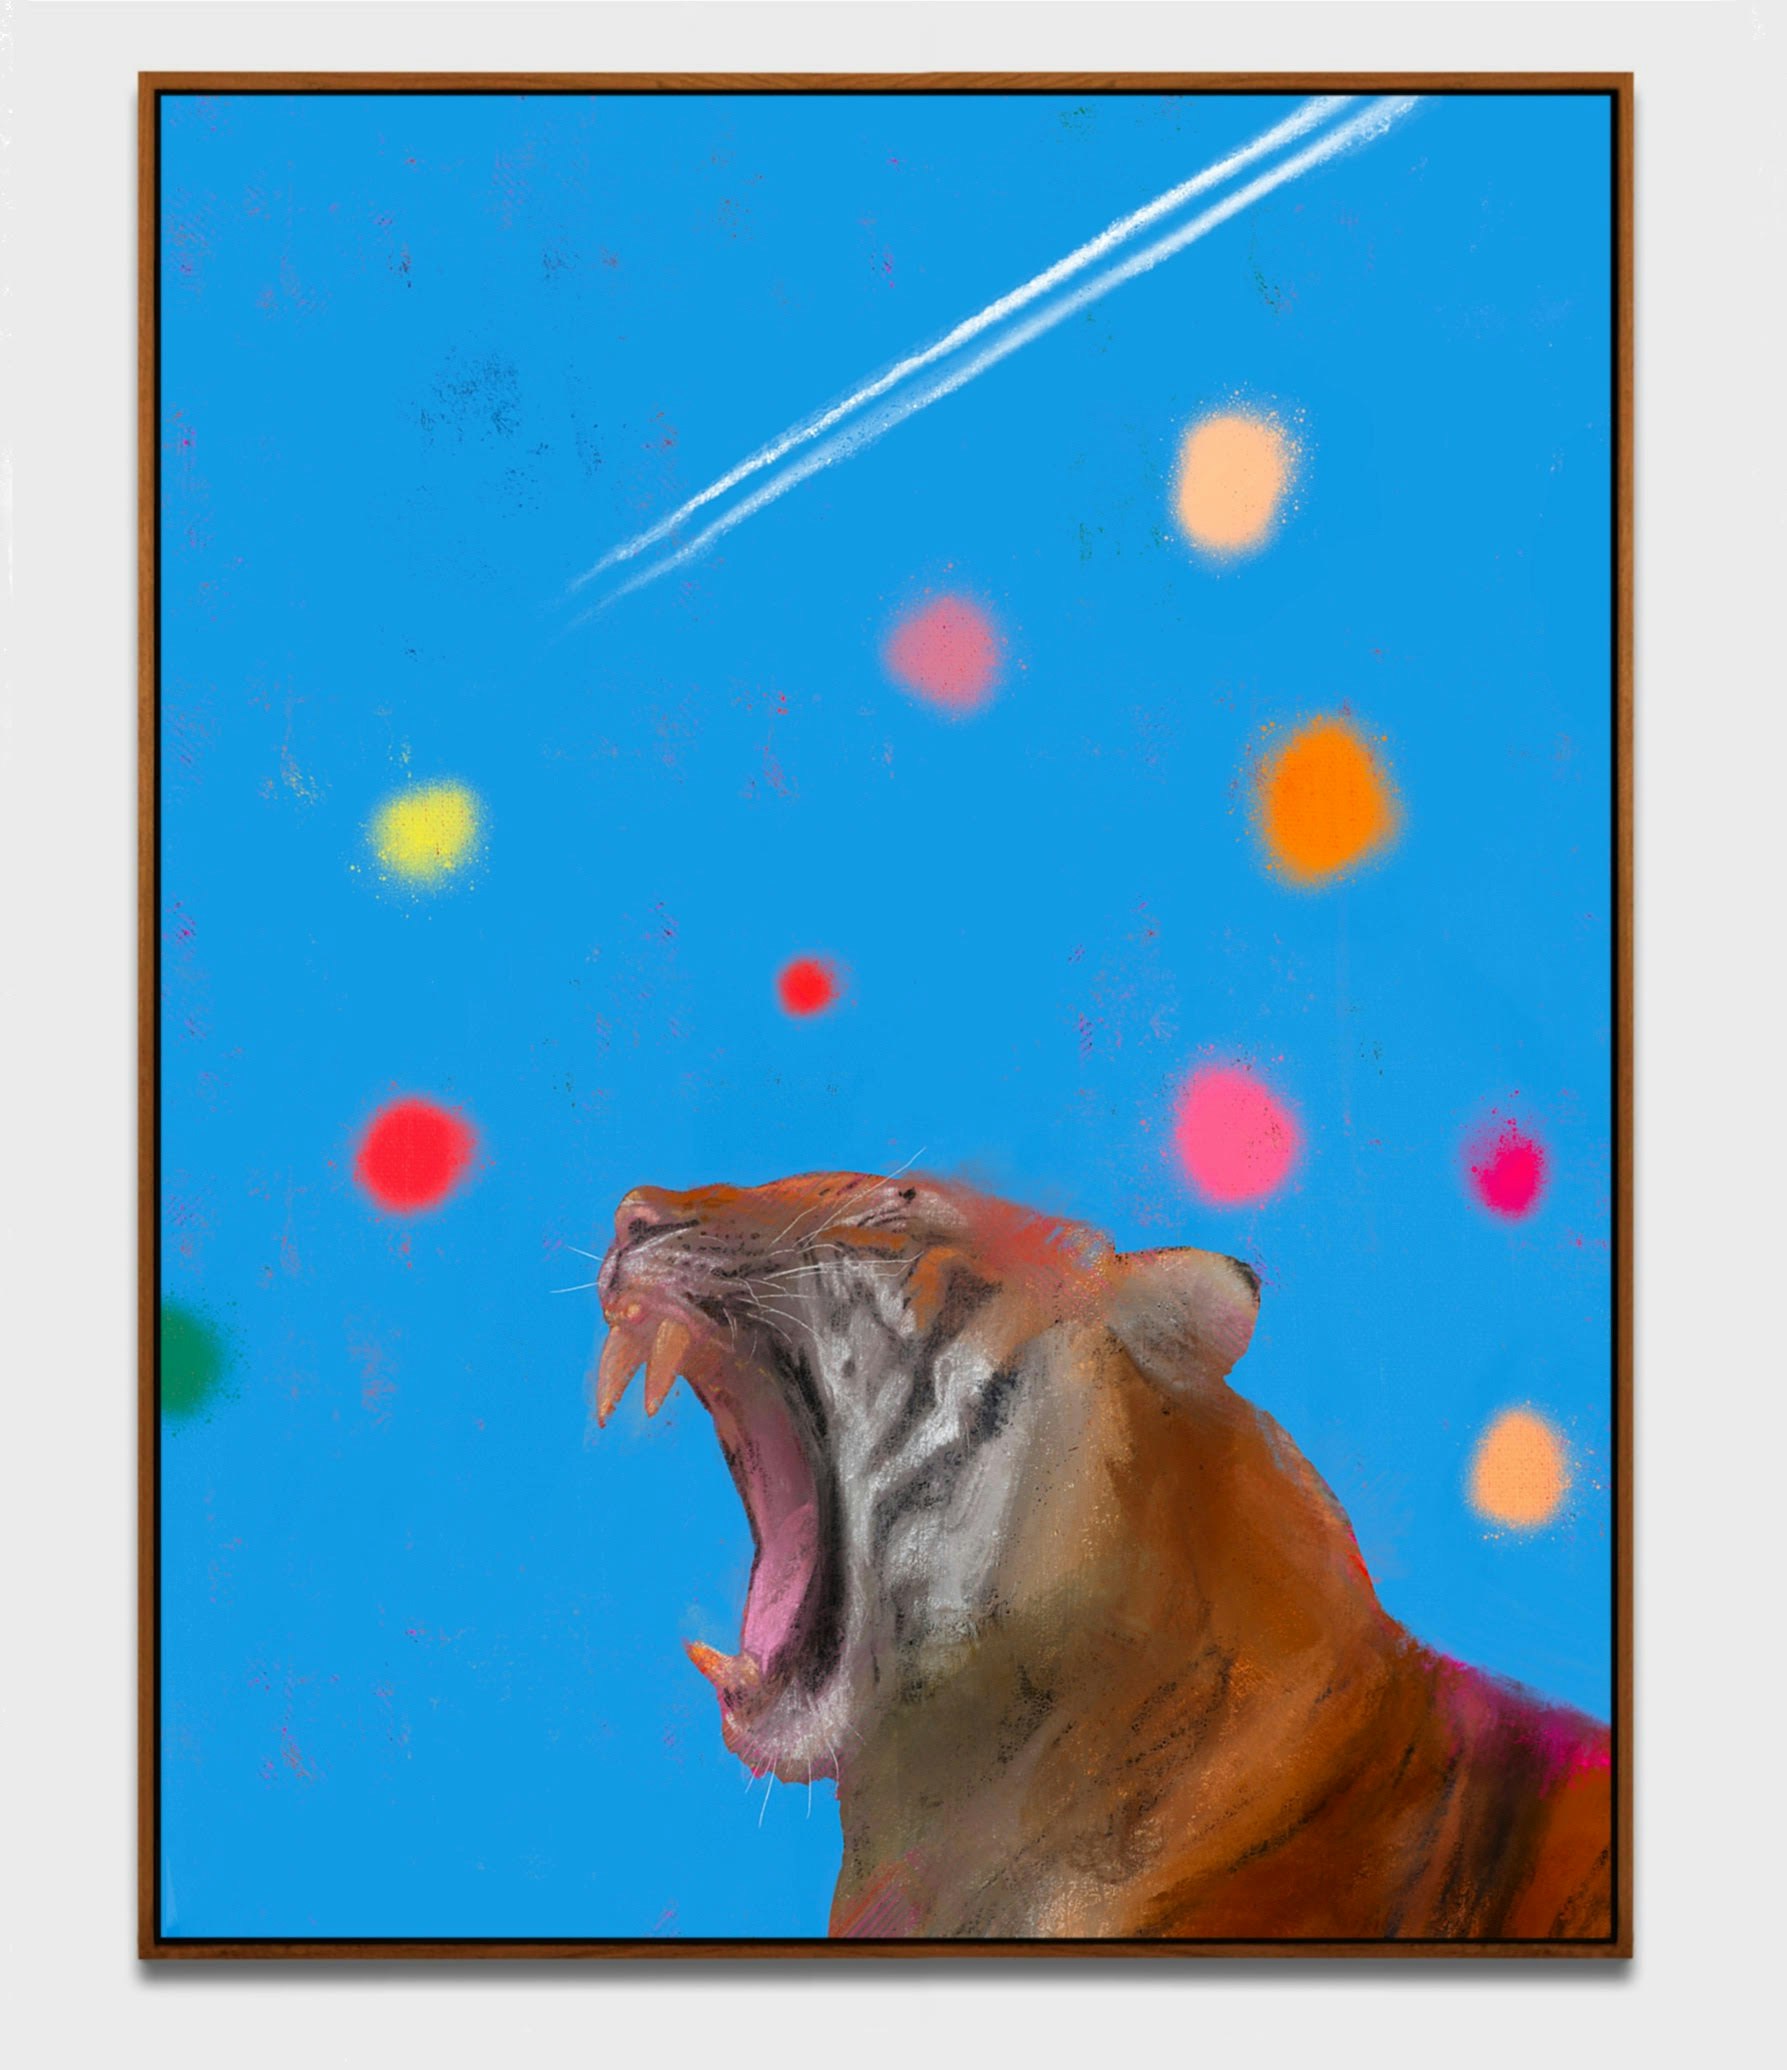 Roaring Tiger over blue background and red dots